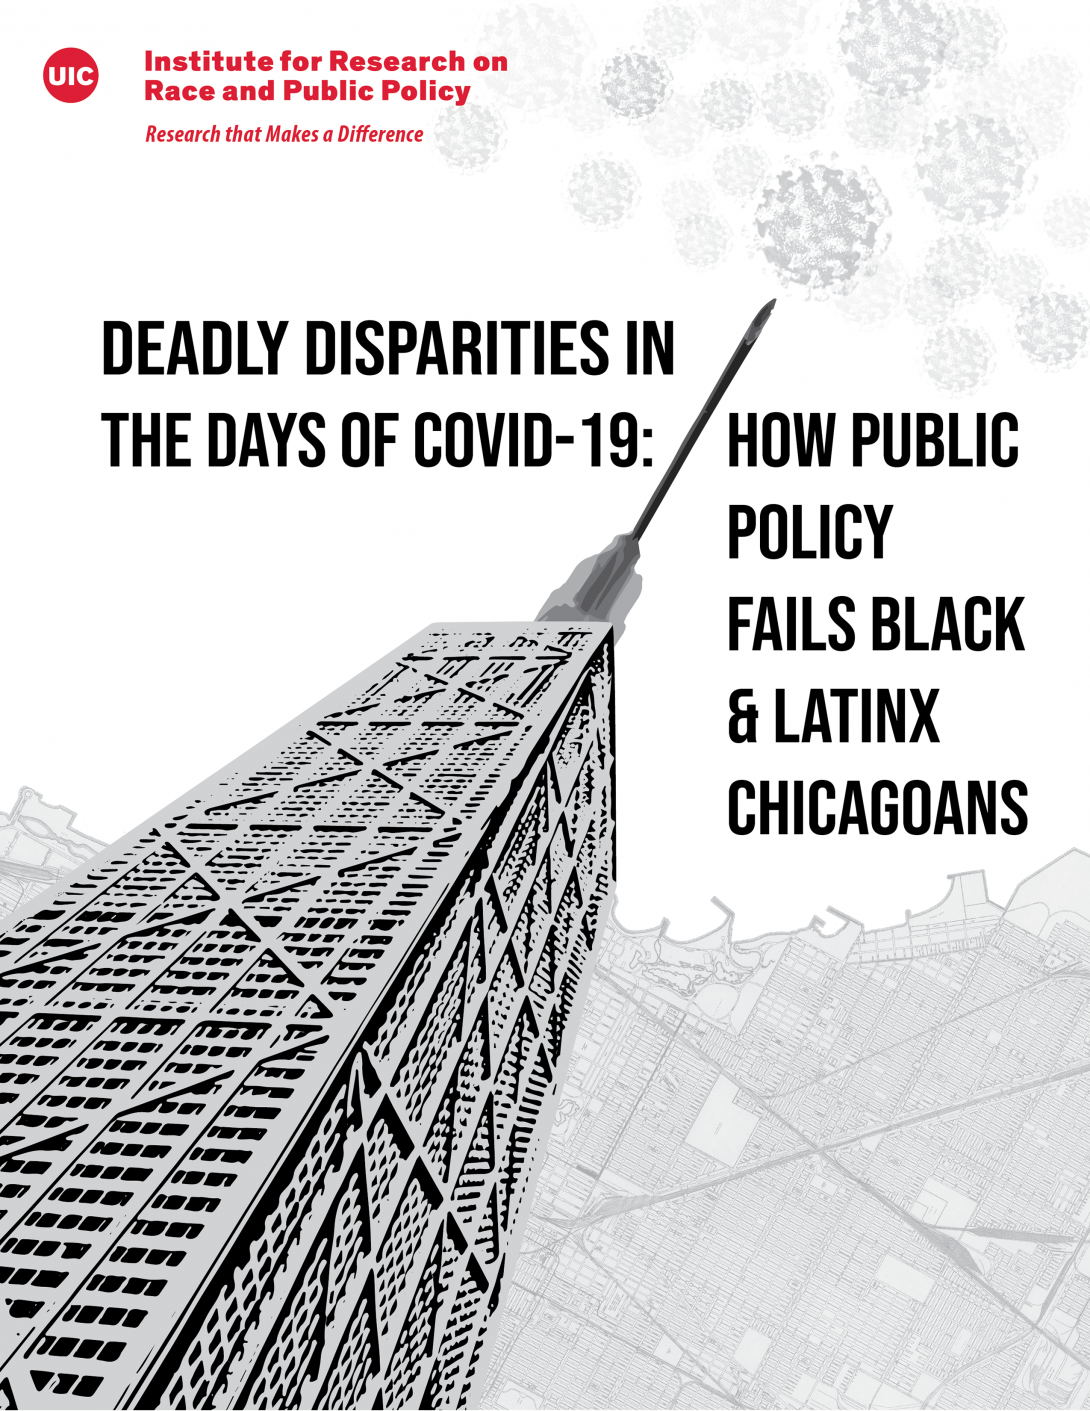 deadly disparities in the days of COVID-19 how public policy fails black and Latinx chicagoans with an image of the chicago Hancock building